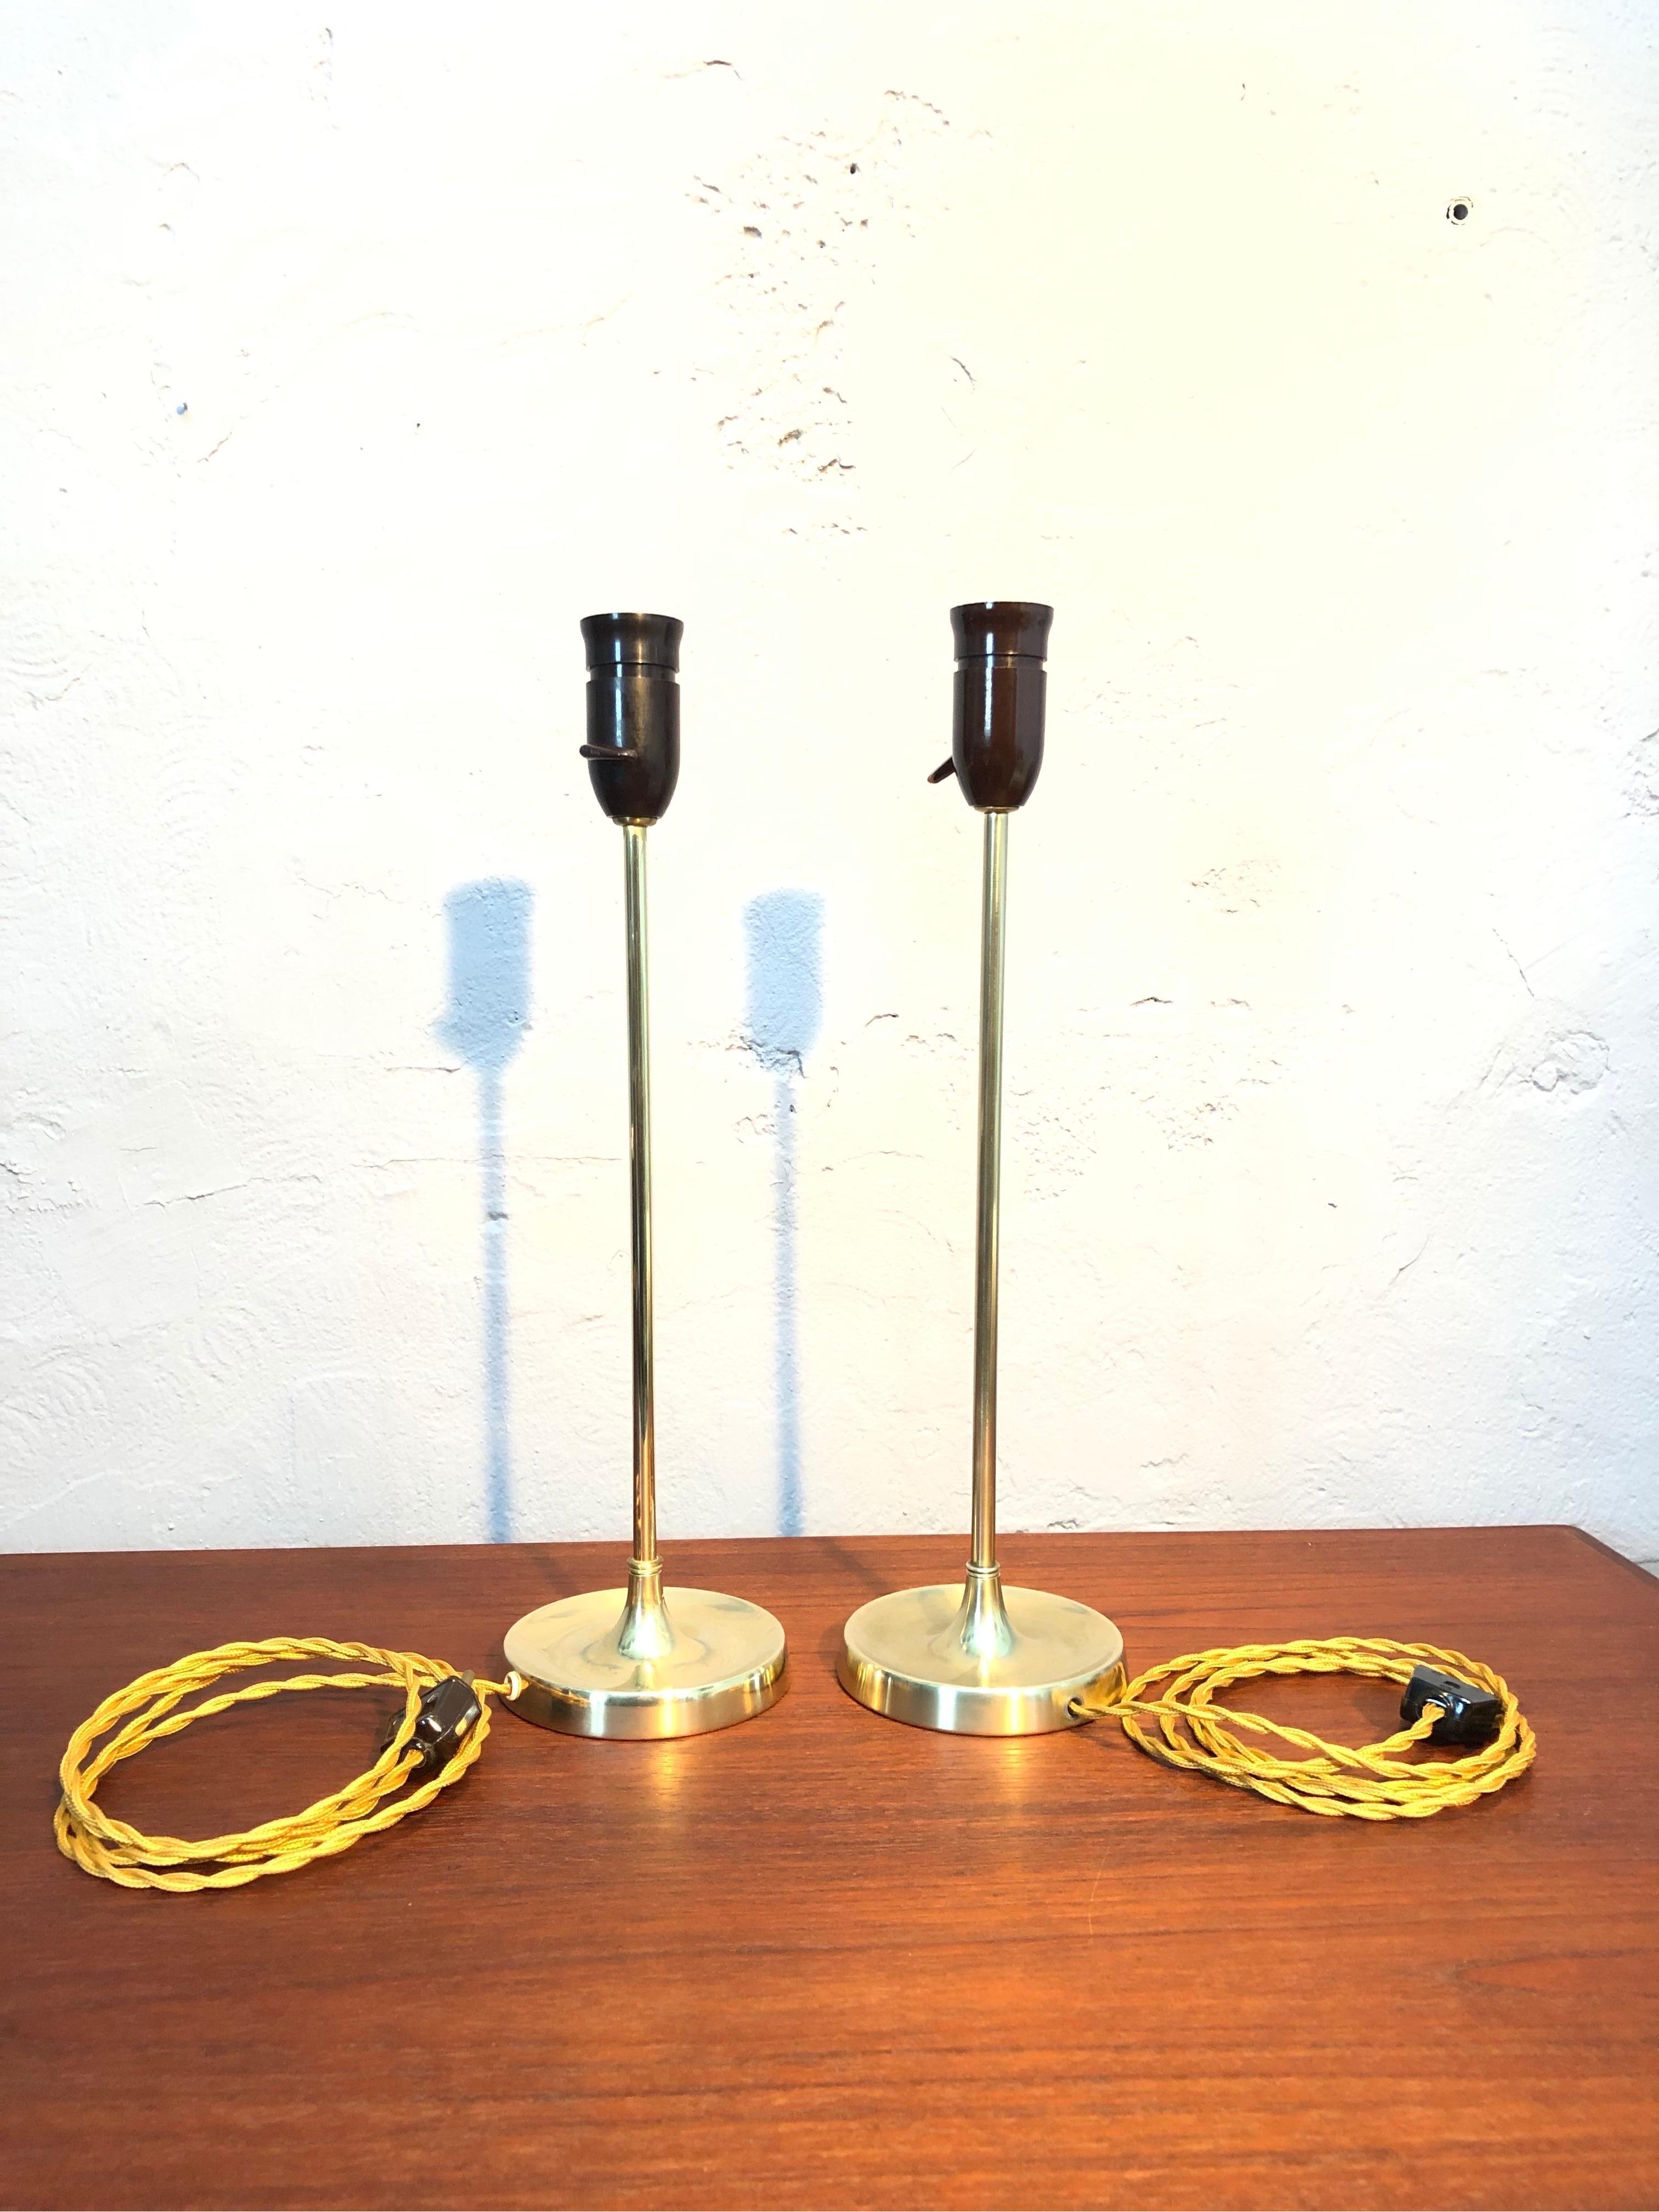 A vintage pair of brass table lamps model 307 designed by Esben Klint for Le Klint from the 1950s.
Rewired with gold cloth flex and can be fitted with an EU, US or UK plug.
Lampshade not included.
Esben Klint was the son of Kaare Klint and, despite